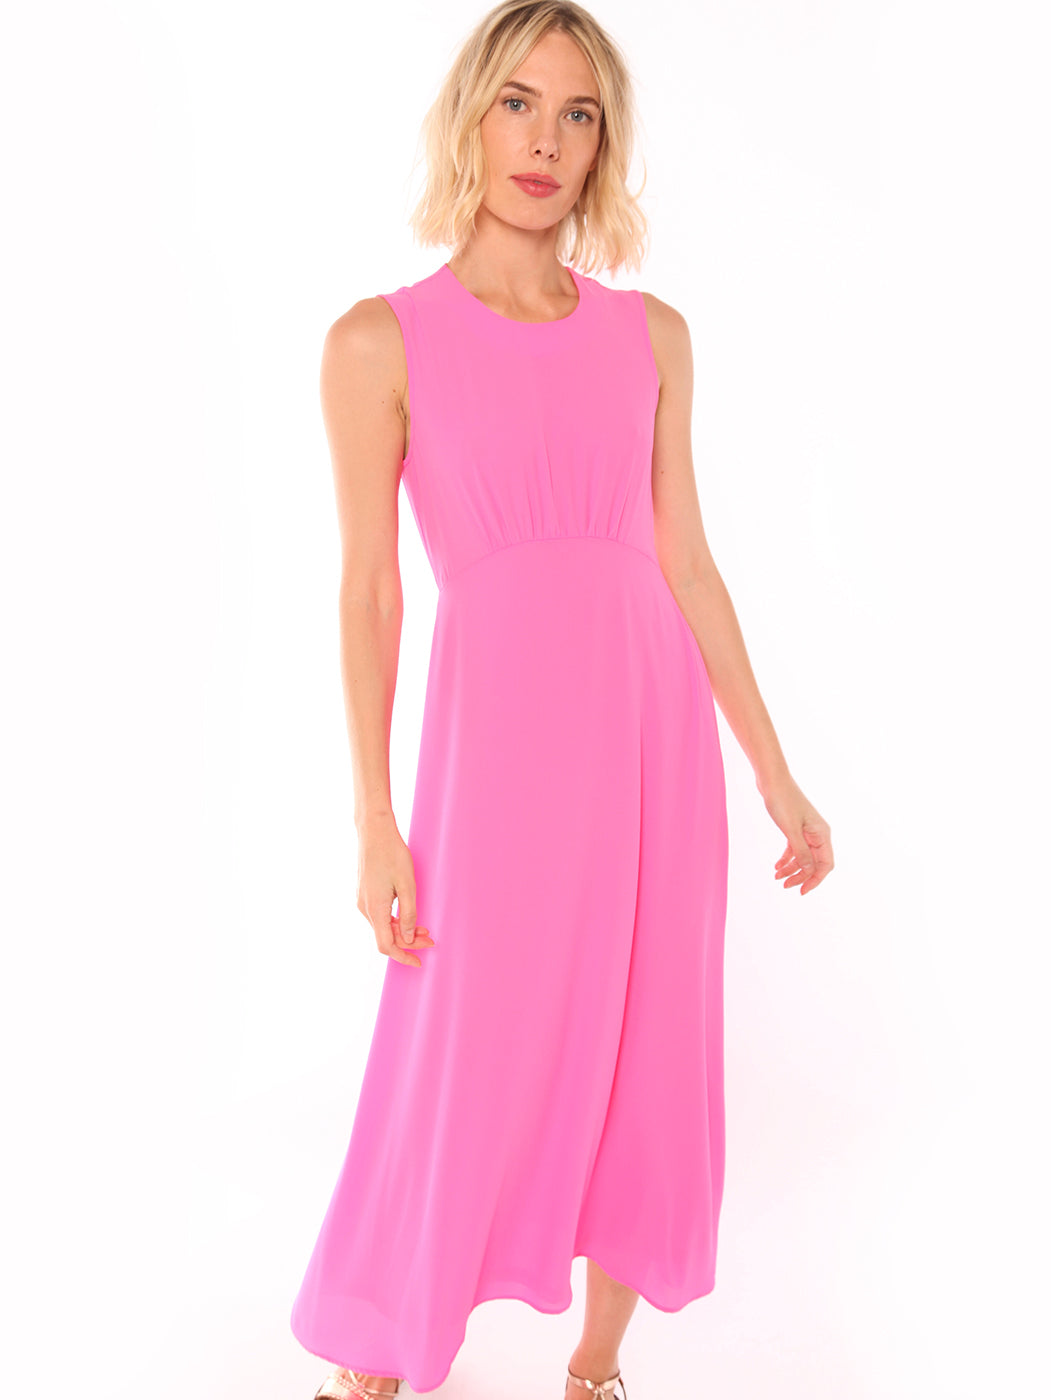 Georgette Maxi Dress in Pink with Removable Cape